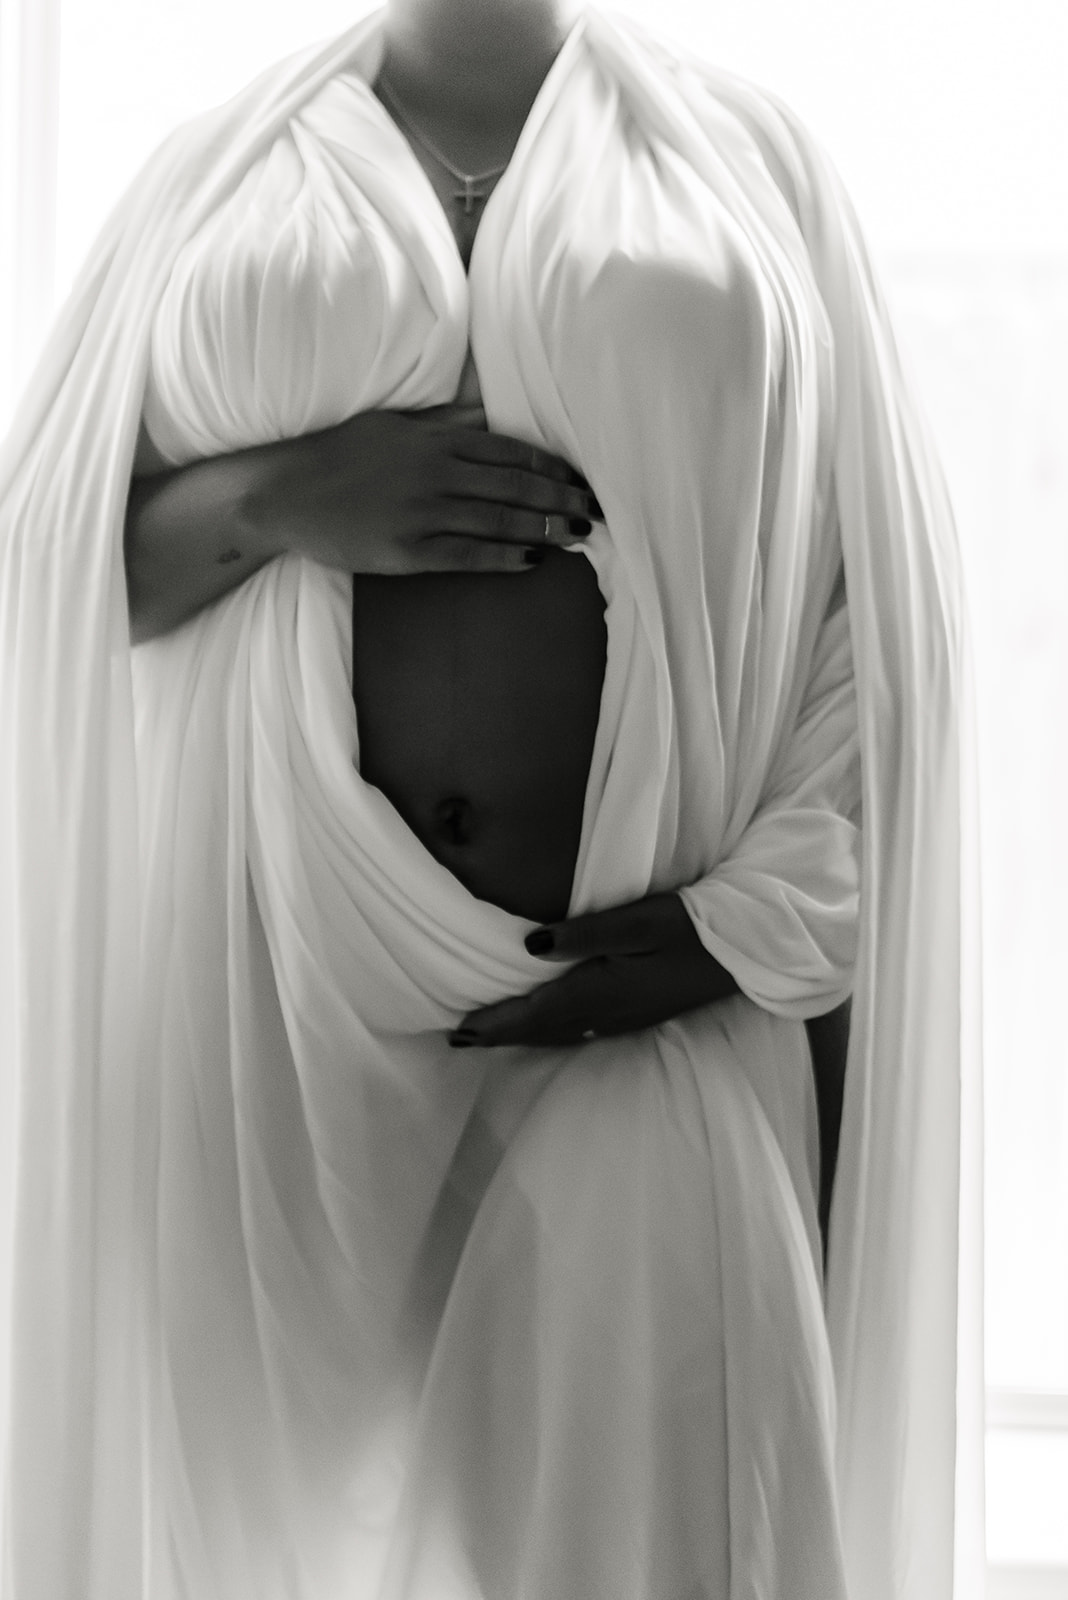 Woman wearing white wrap for maternity photos